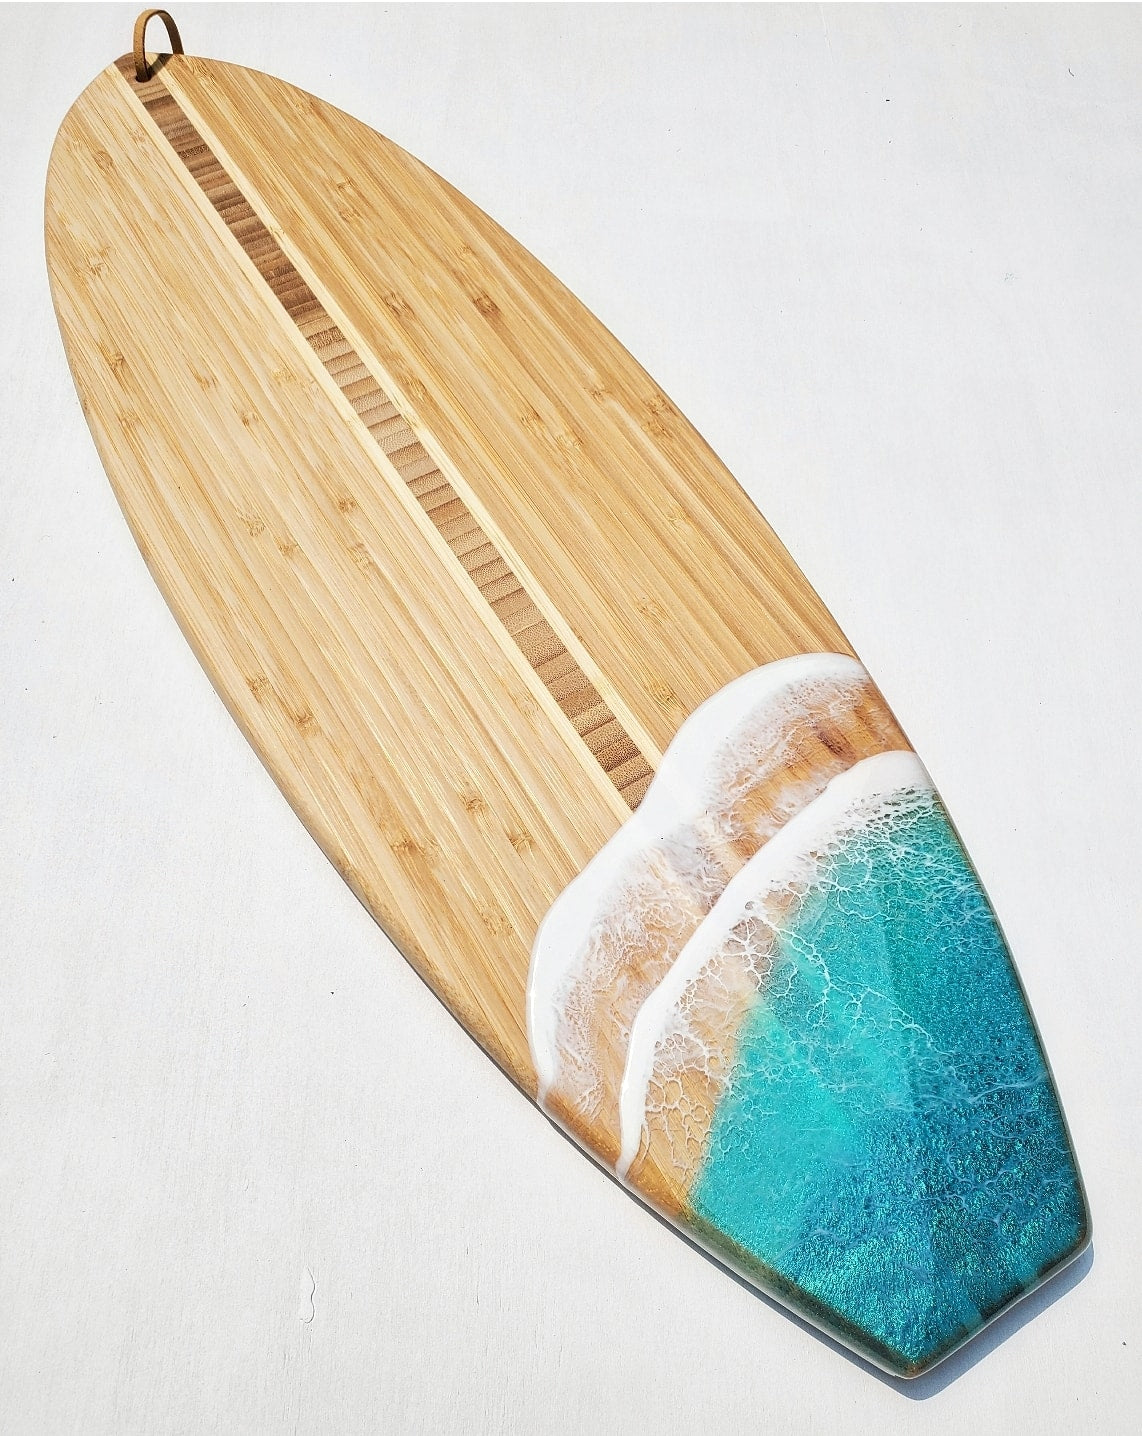 Surfs UP! Charcuterie Serving Board